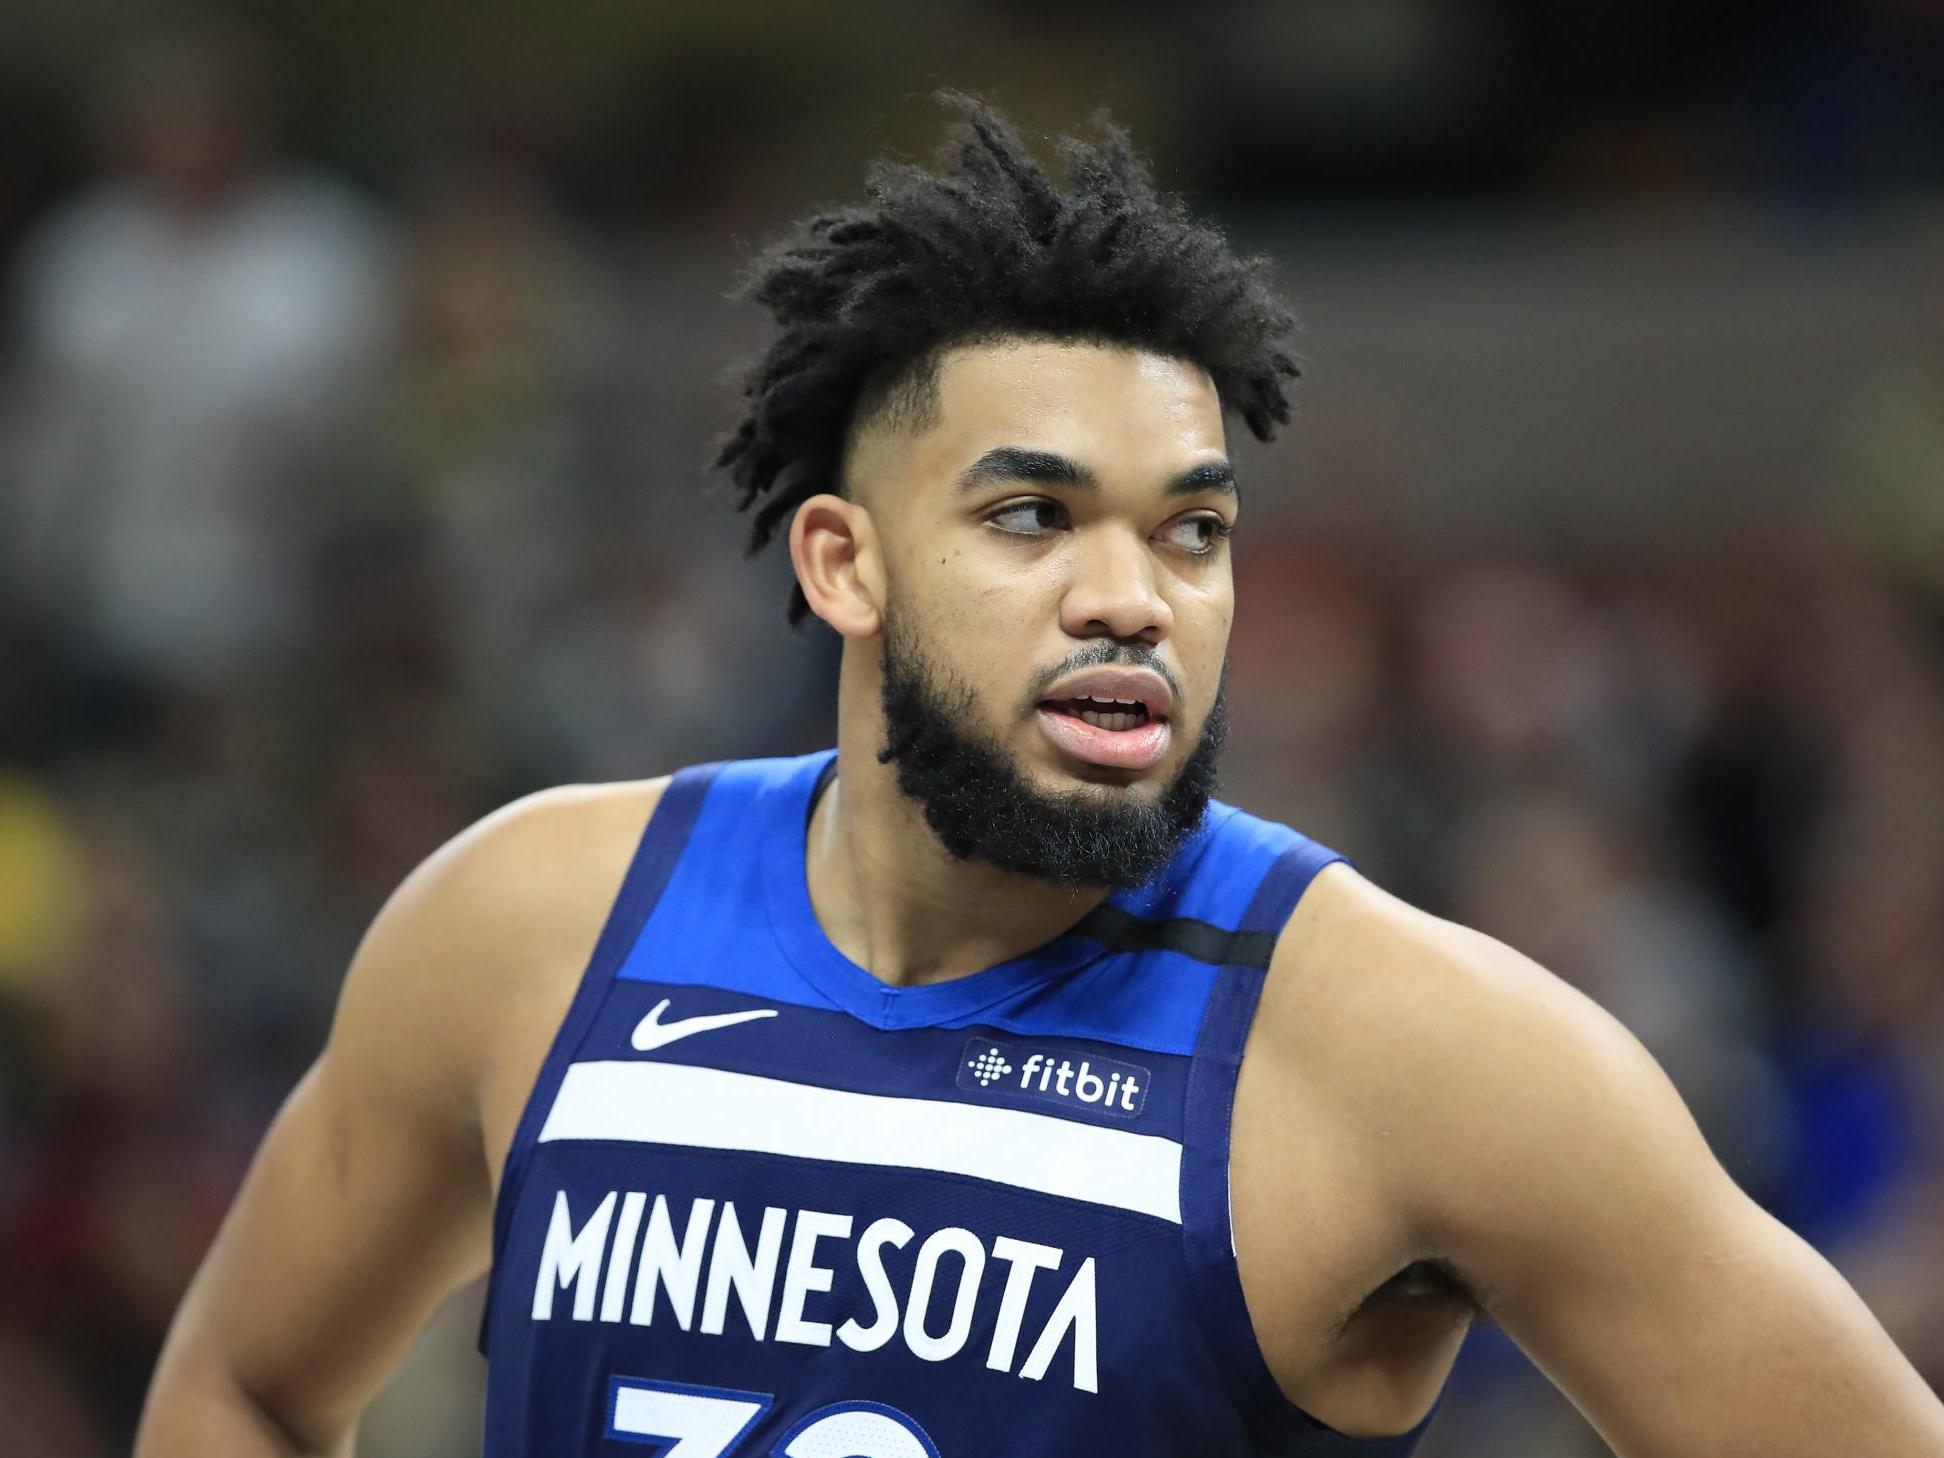 Anthony-Towns made an emotional plea online to the public